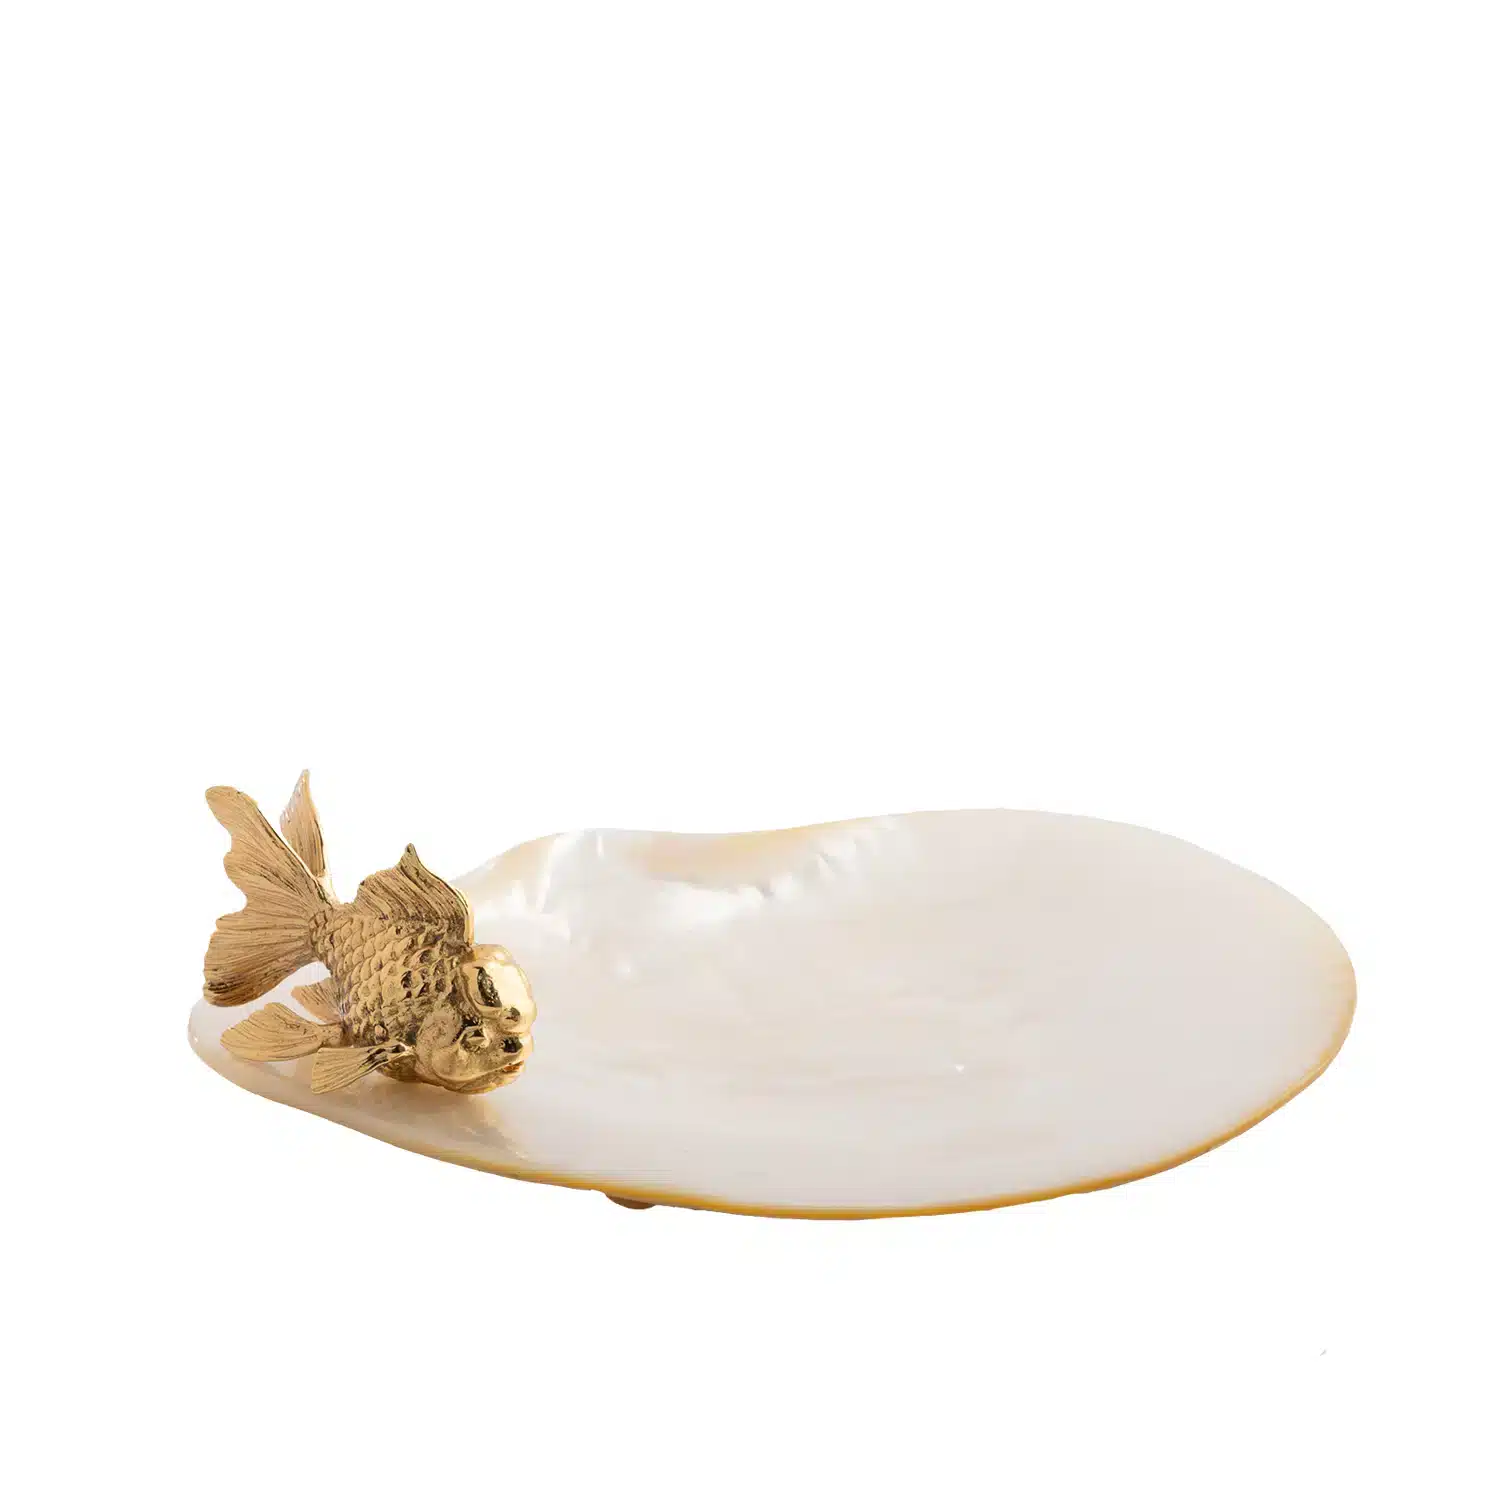 A stylish and unique plate made of quartz with a fish accent